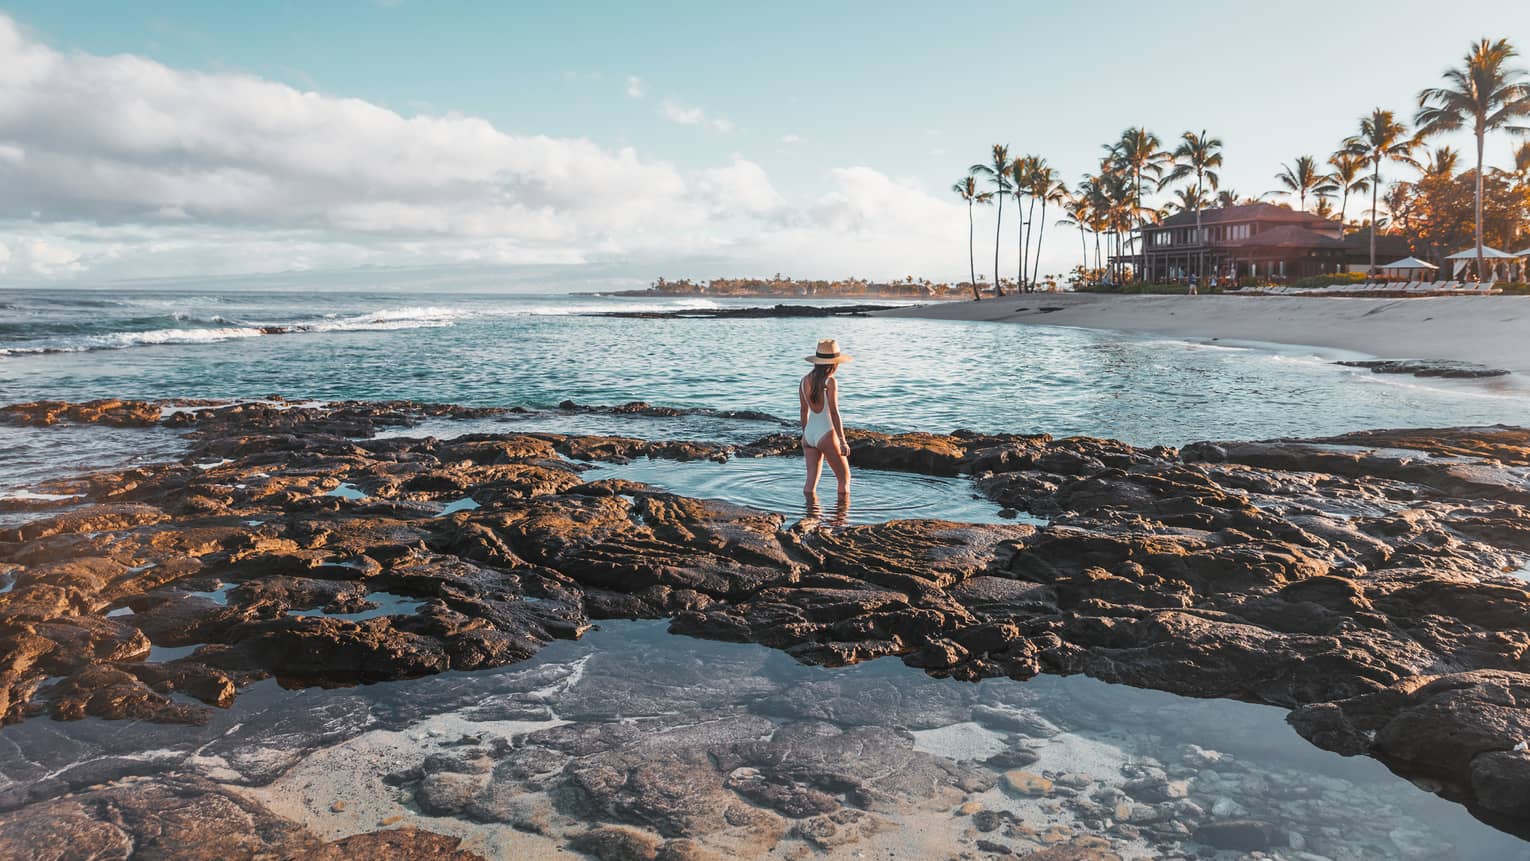 A guest exploring tidal pools by the beach in Hualalai